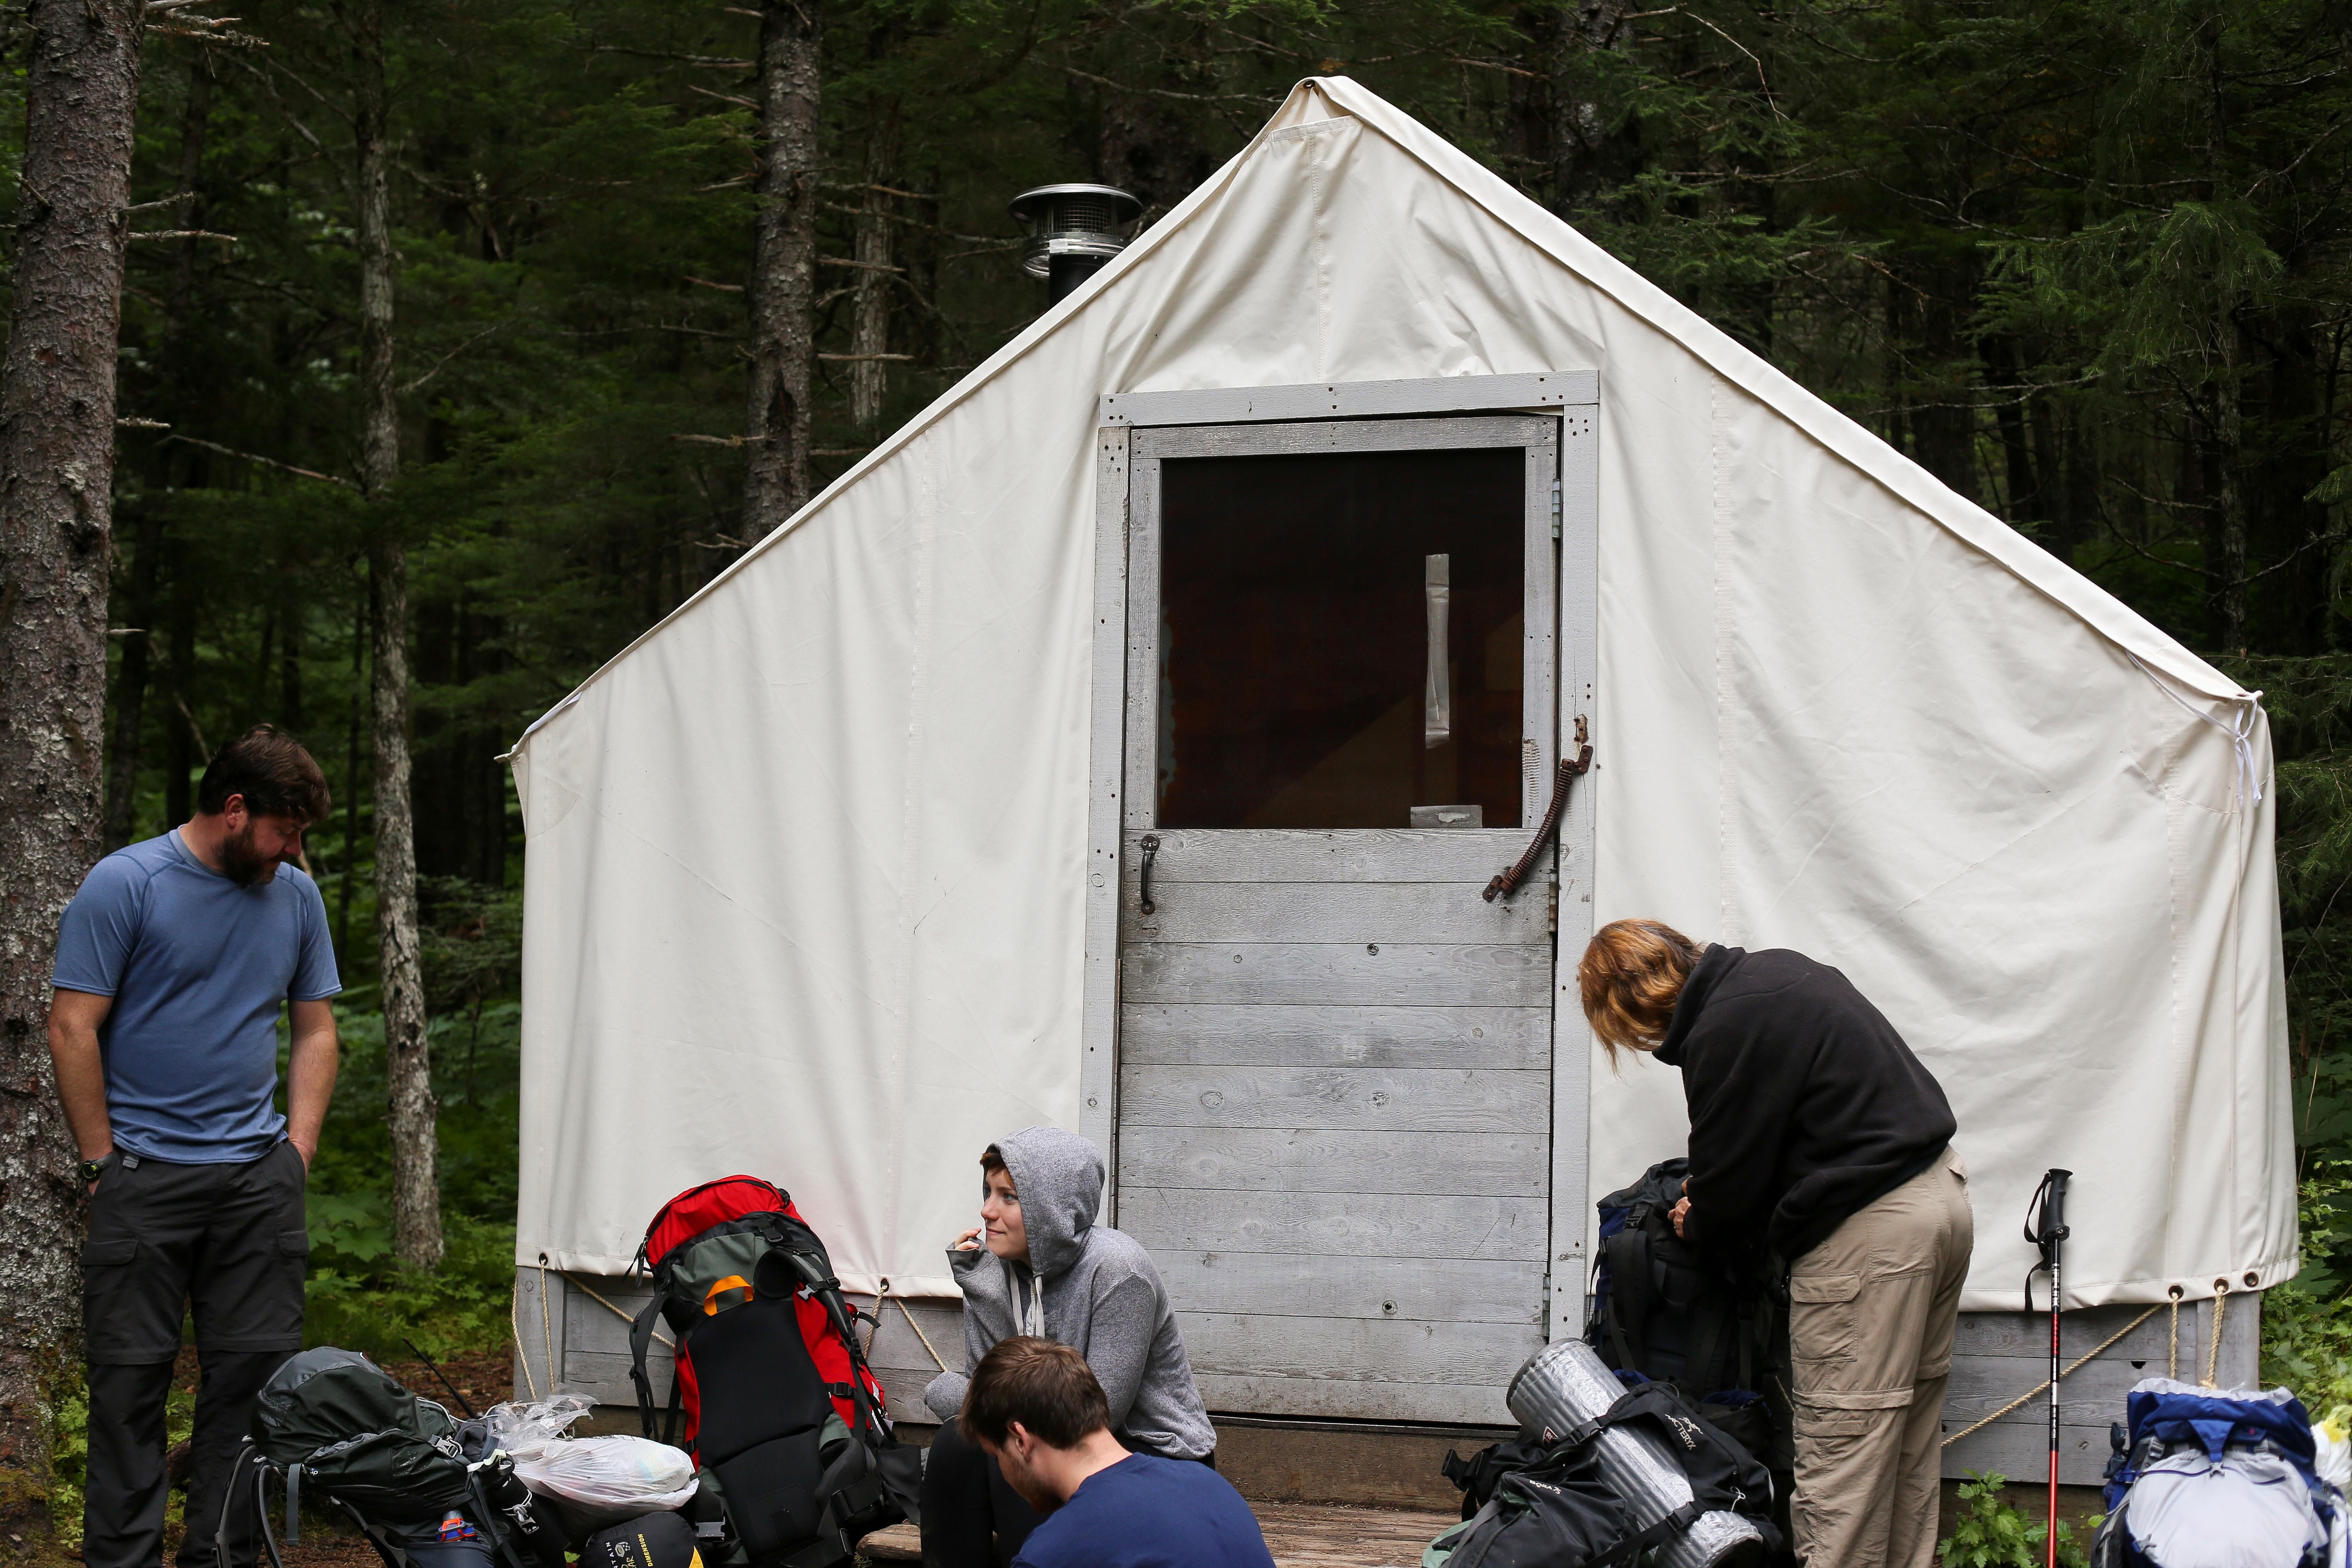 People gather near a white canvas tent